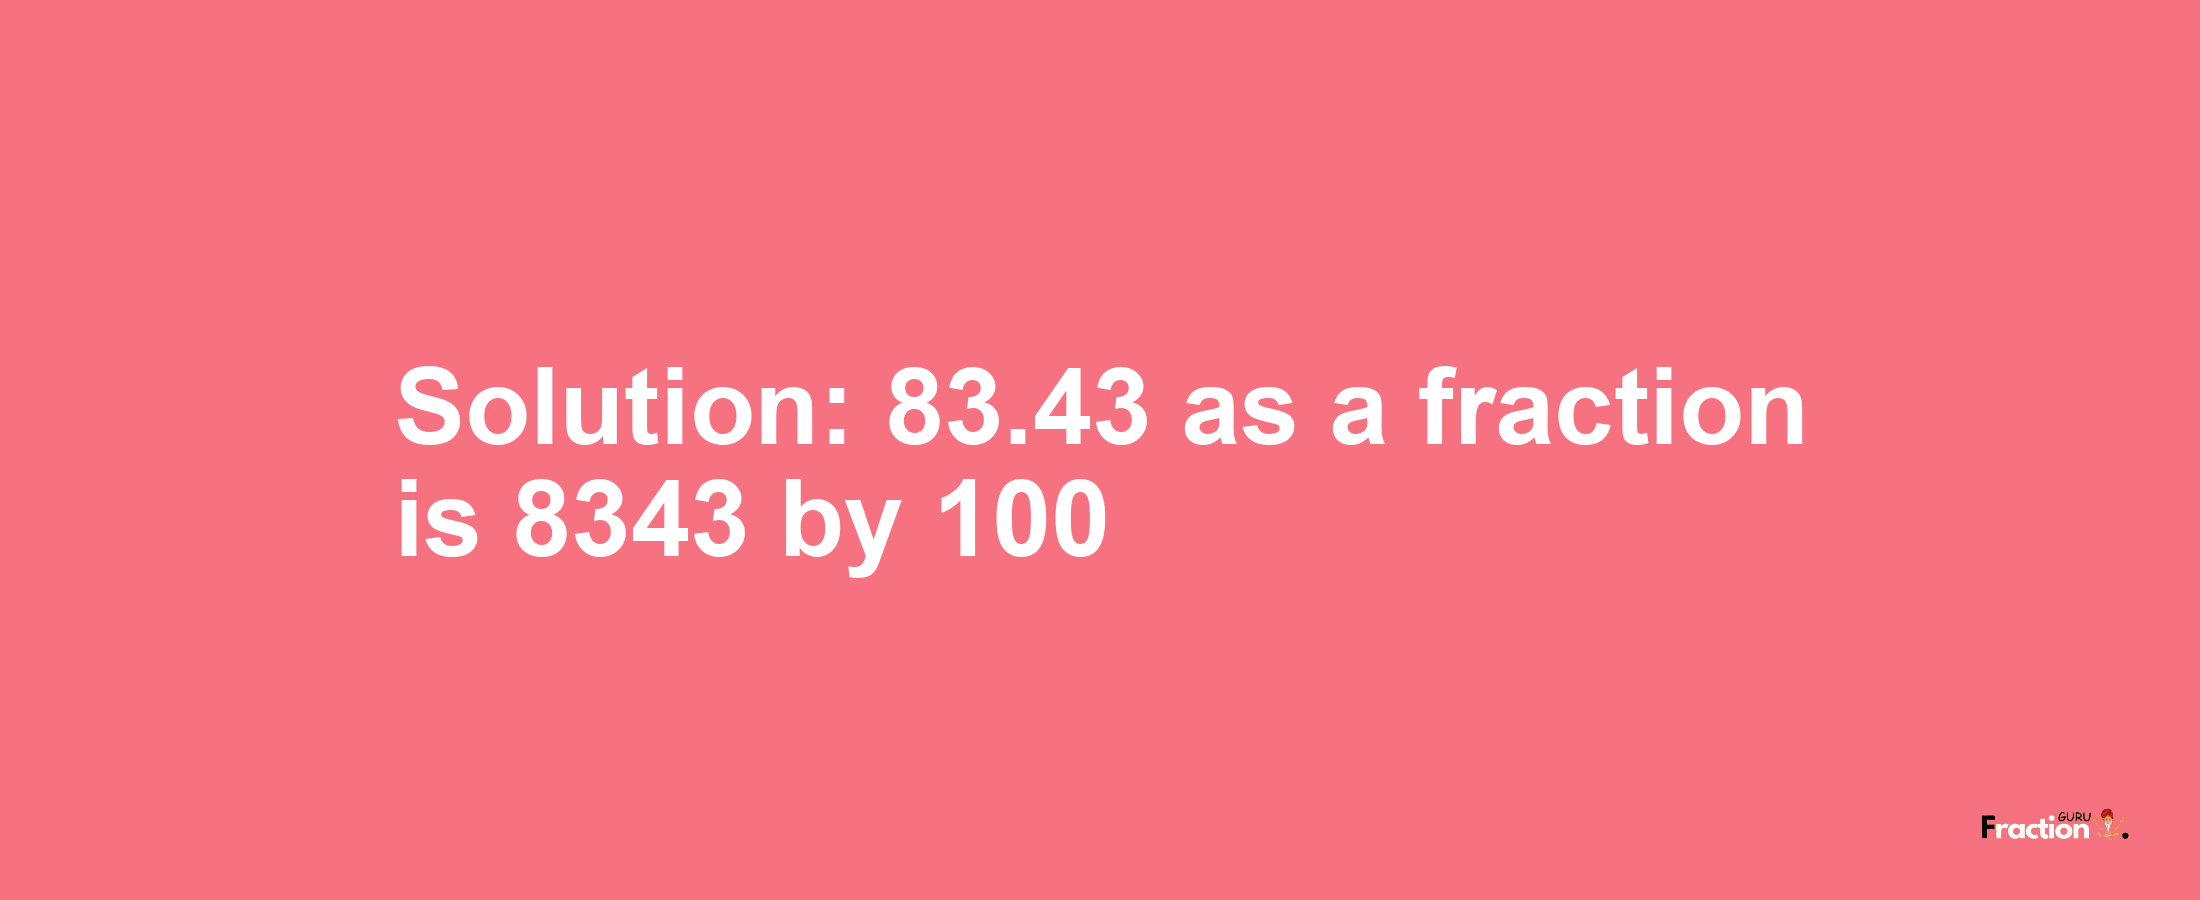 Solution:83.43 as a fraction is 8343/100